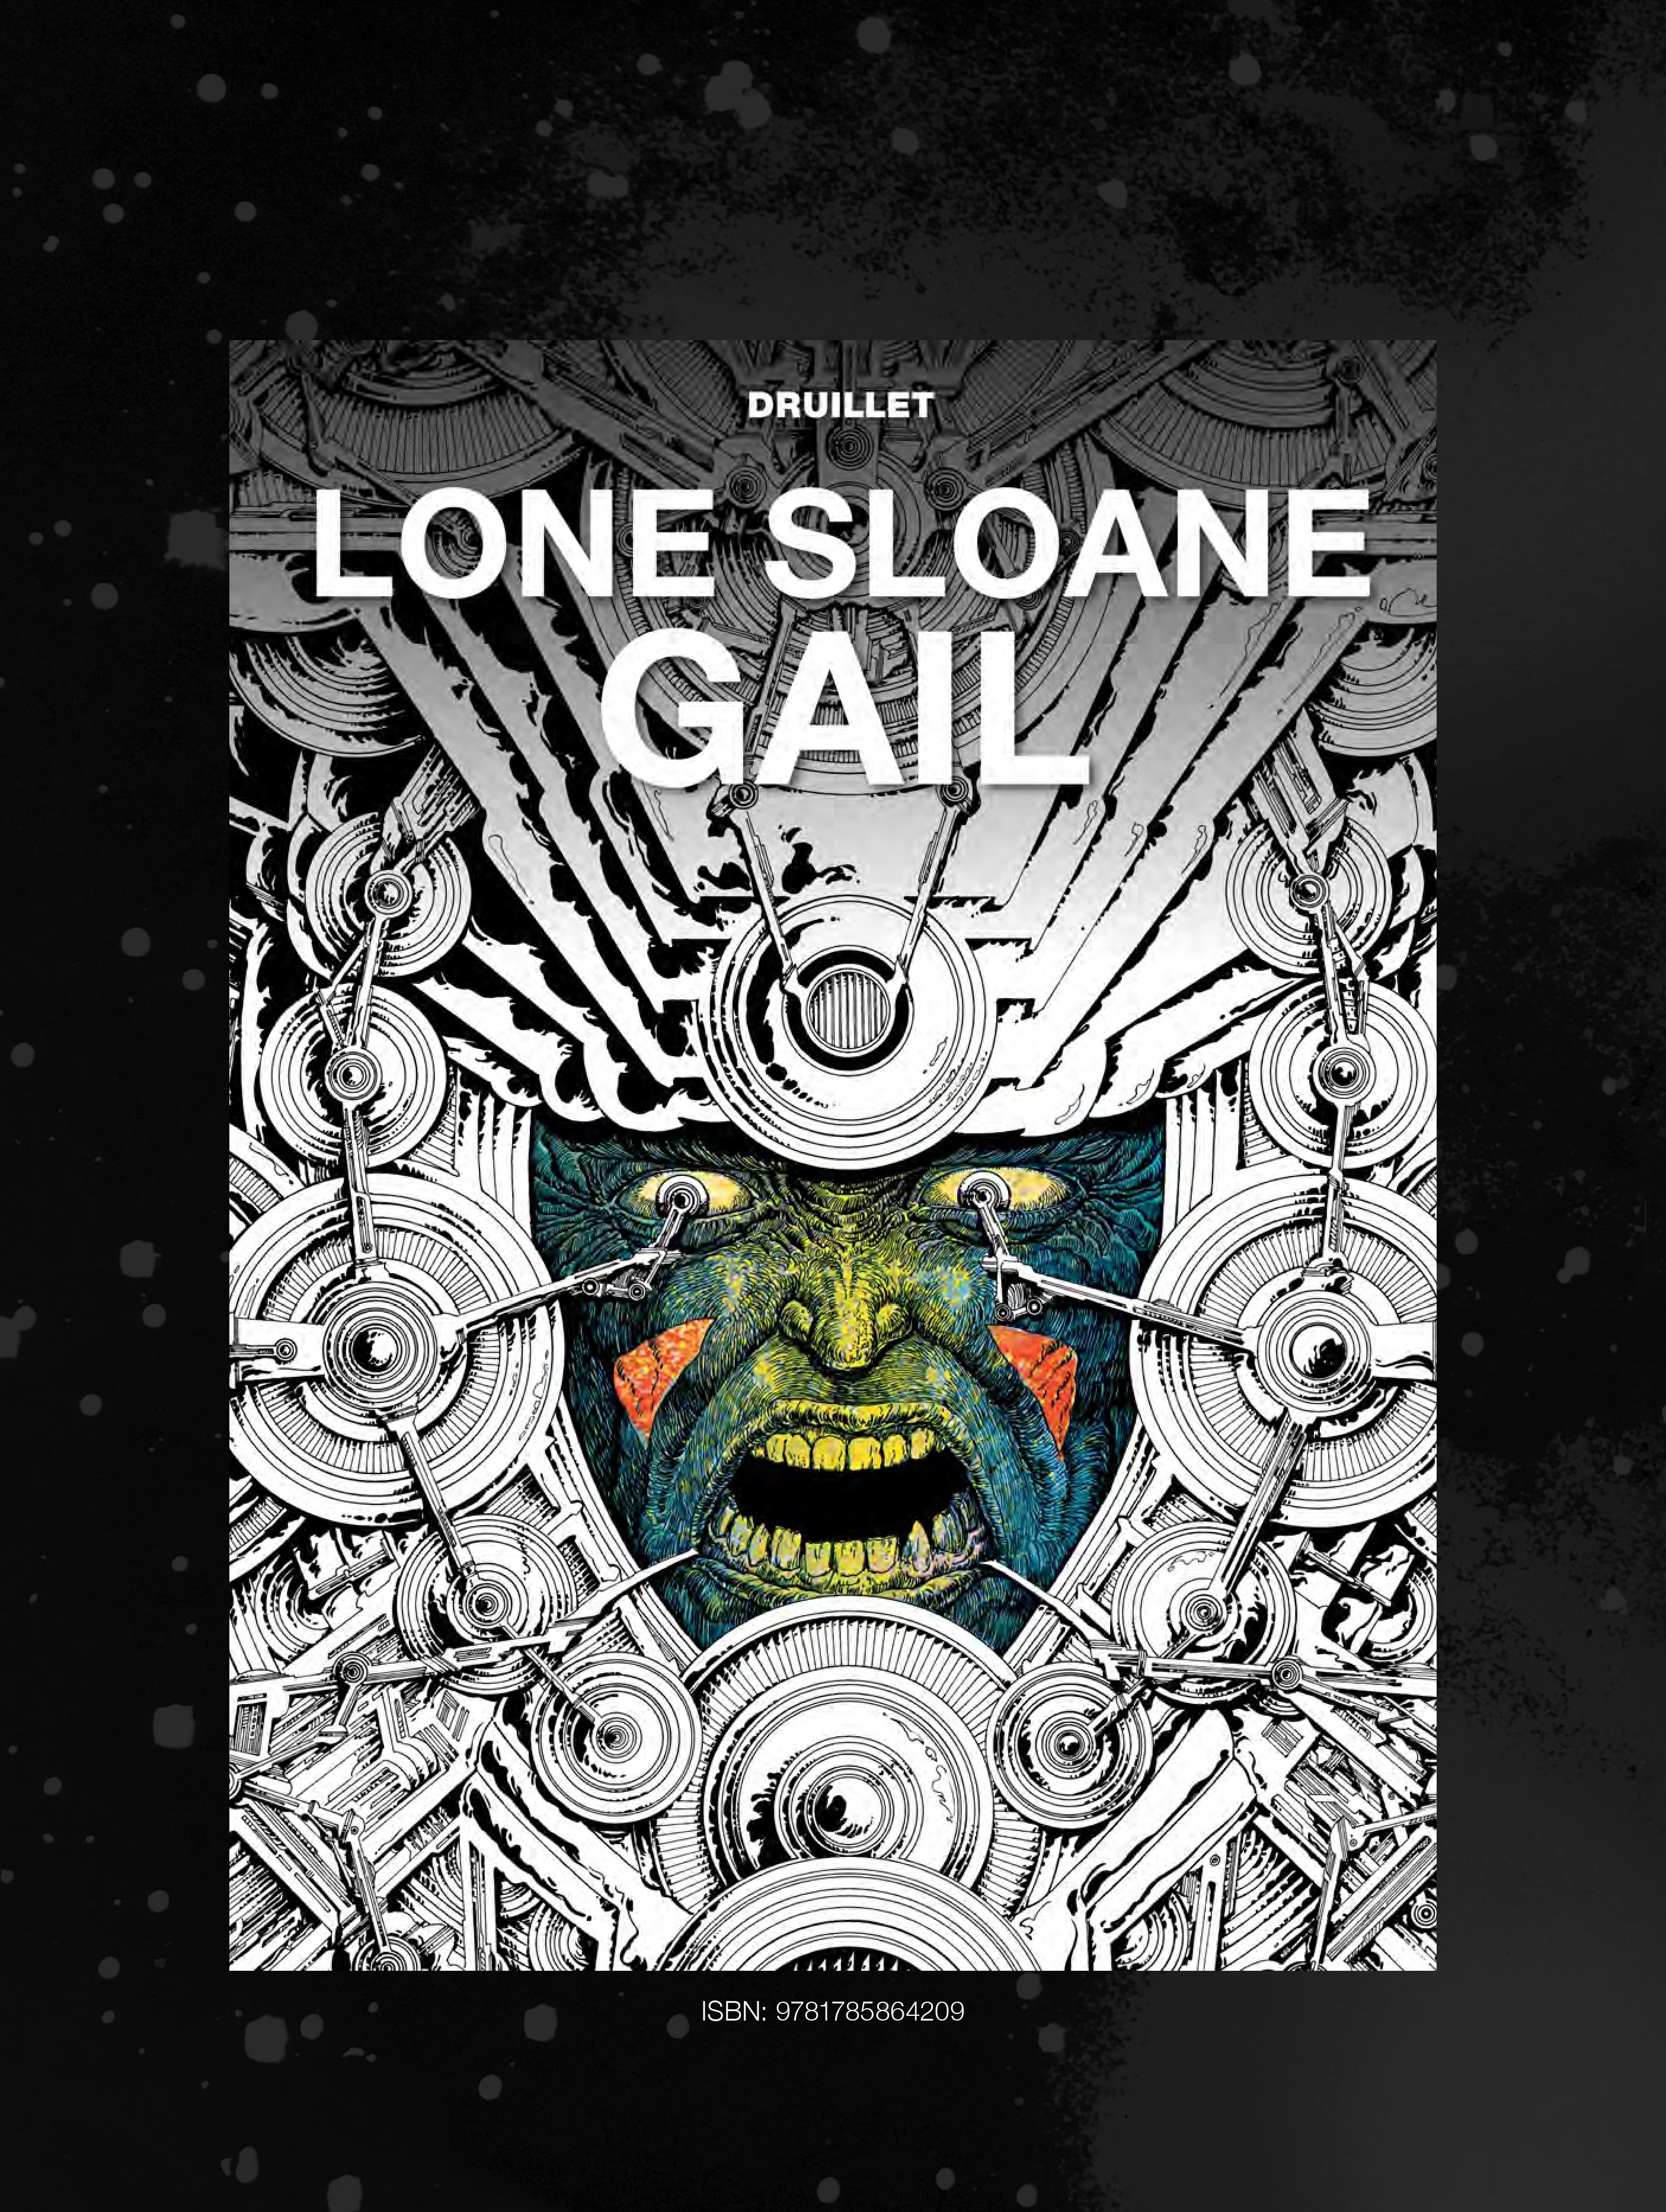 Read online Lone Sloane: Chaos comic -  Issue # Full - 60